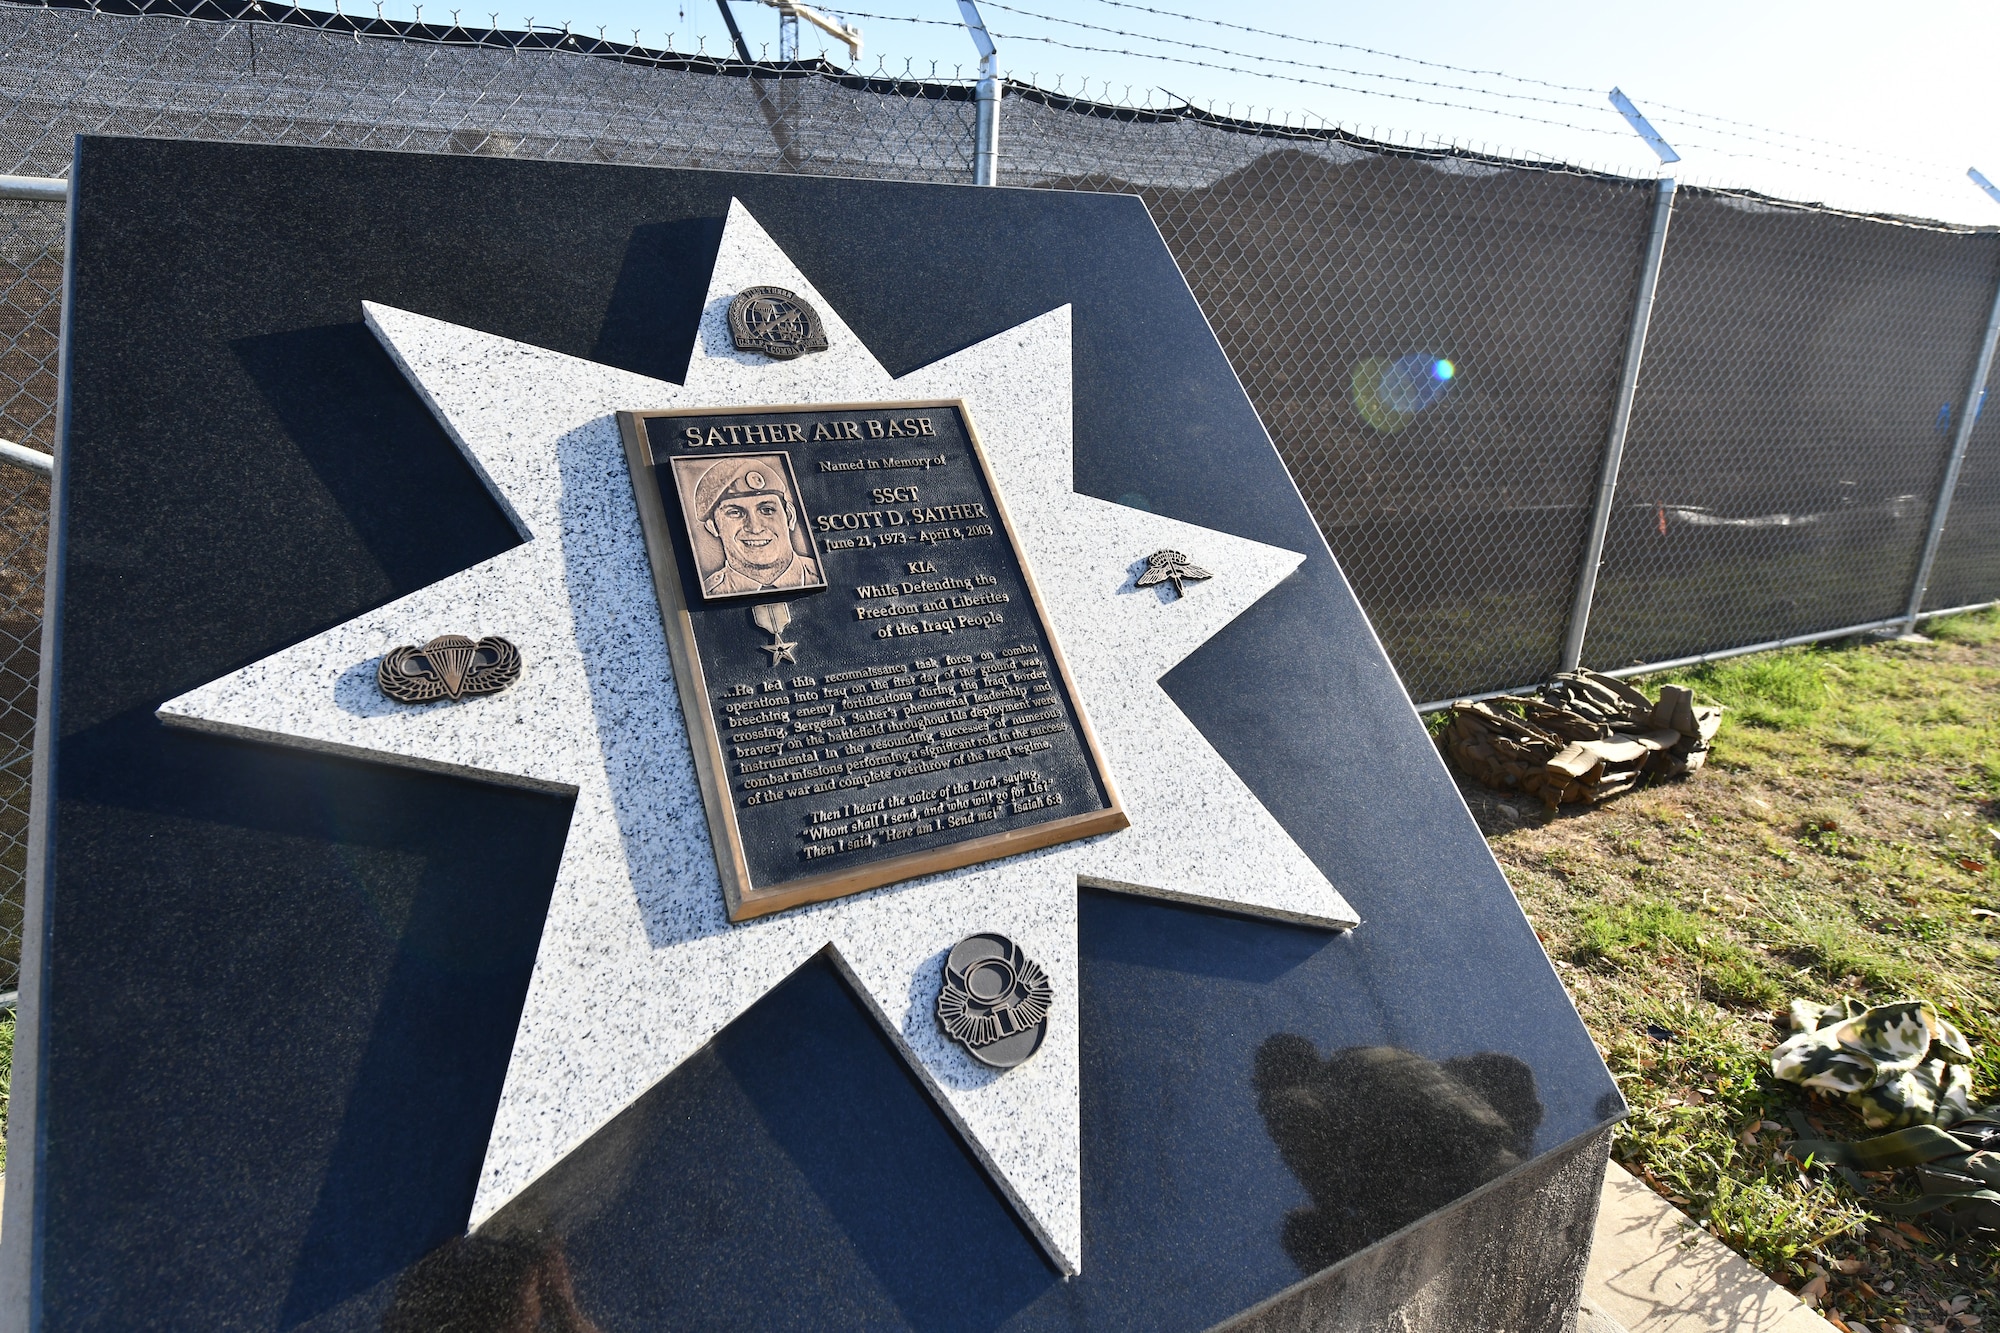 The newly refitted memorial for U.S. Air Force Staff Sgt. Scott Sather at the Special Warfare Training Wing training compound Joint Base San Antonio, Chapman Training Annex, Apr. 8, 2022. The wing and echelon units hosted a two and one-half mile ruck march followed by Memorial pushups and the unveiling of refitted memorials in coordination with Gold Star families (U.S. Air Force photo by Brian Boisvert)